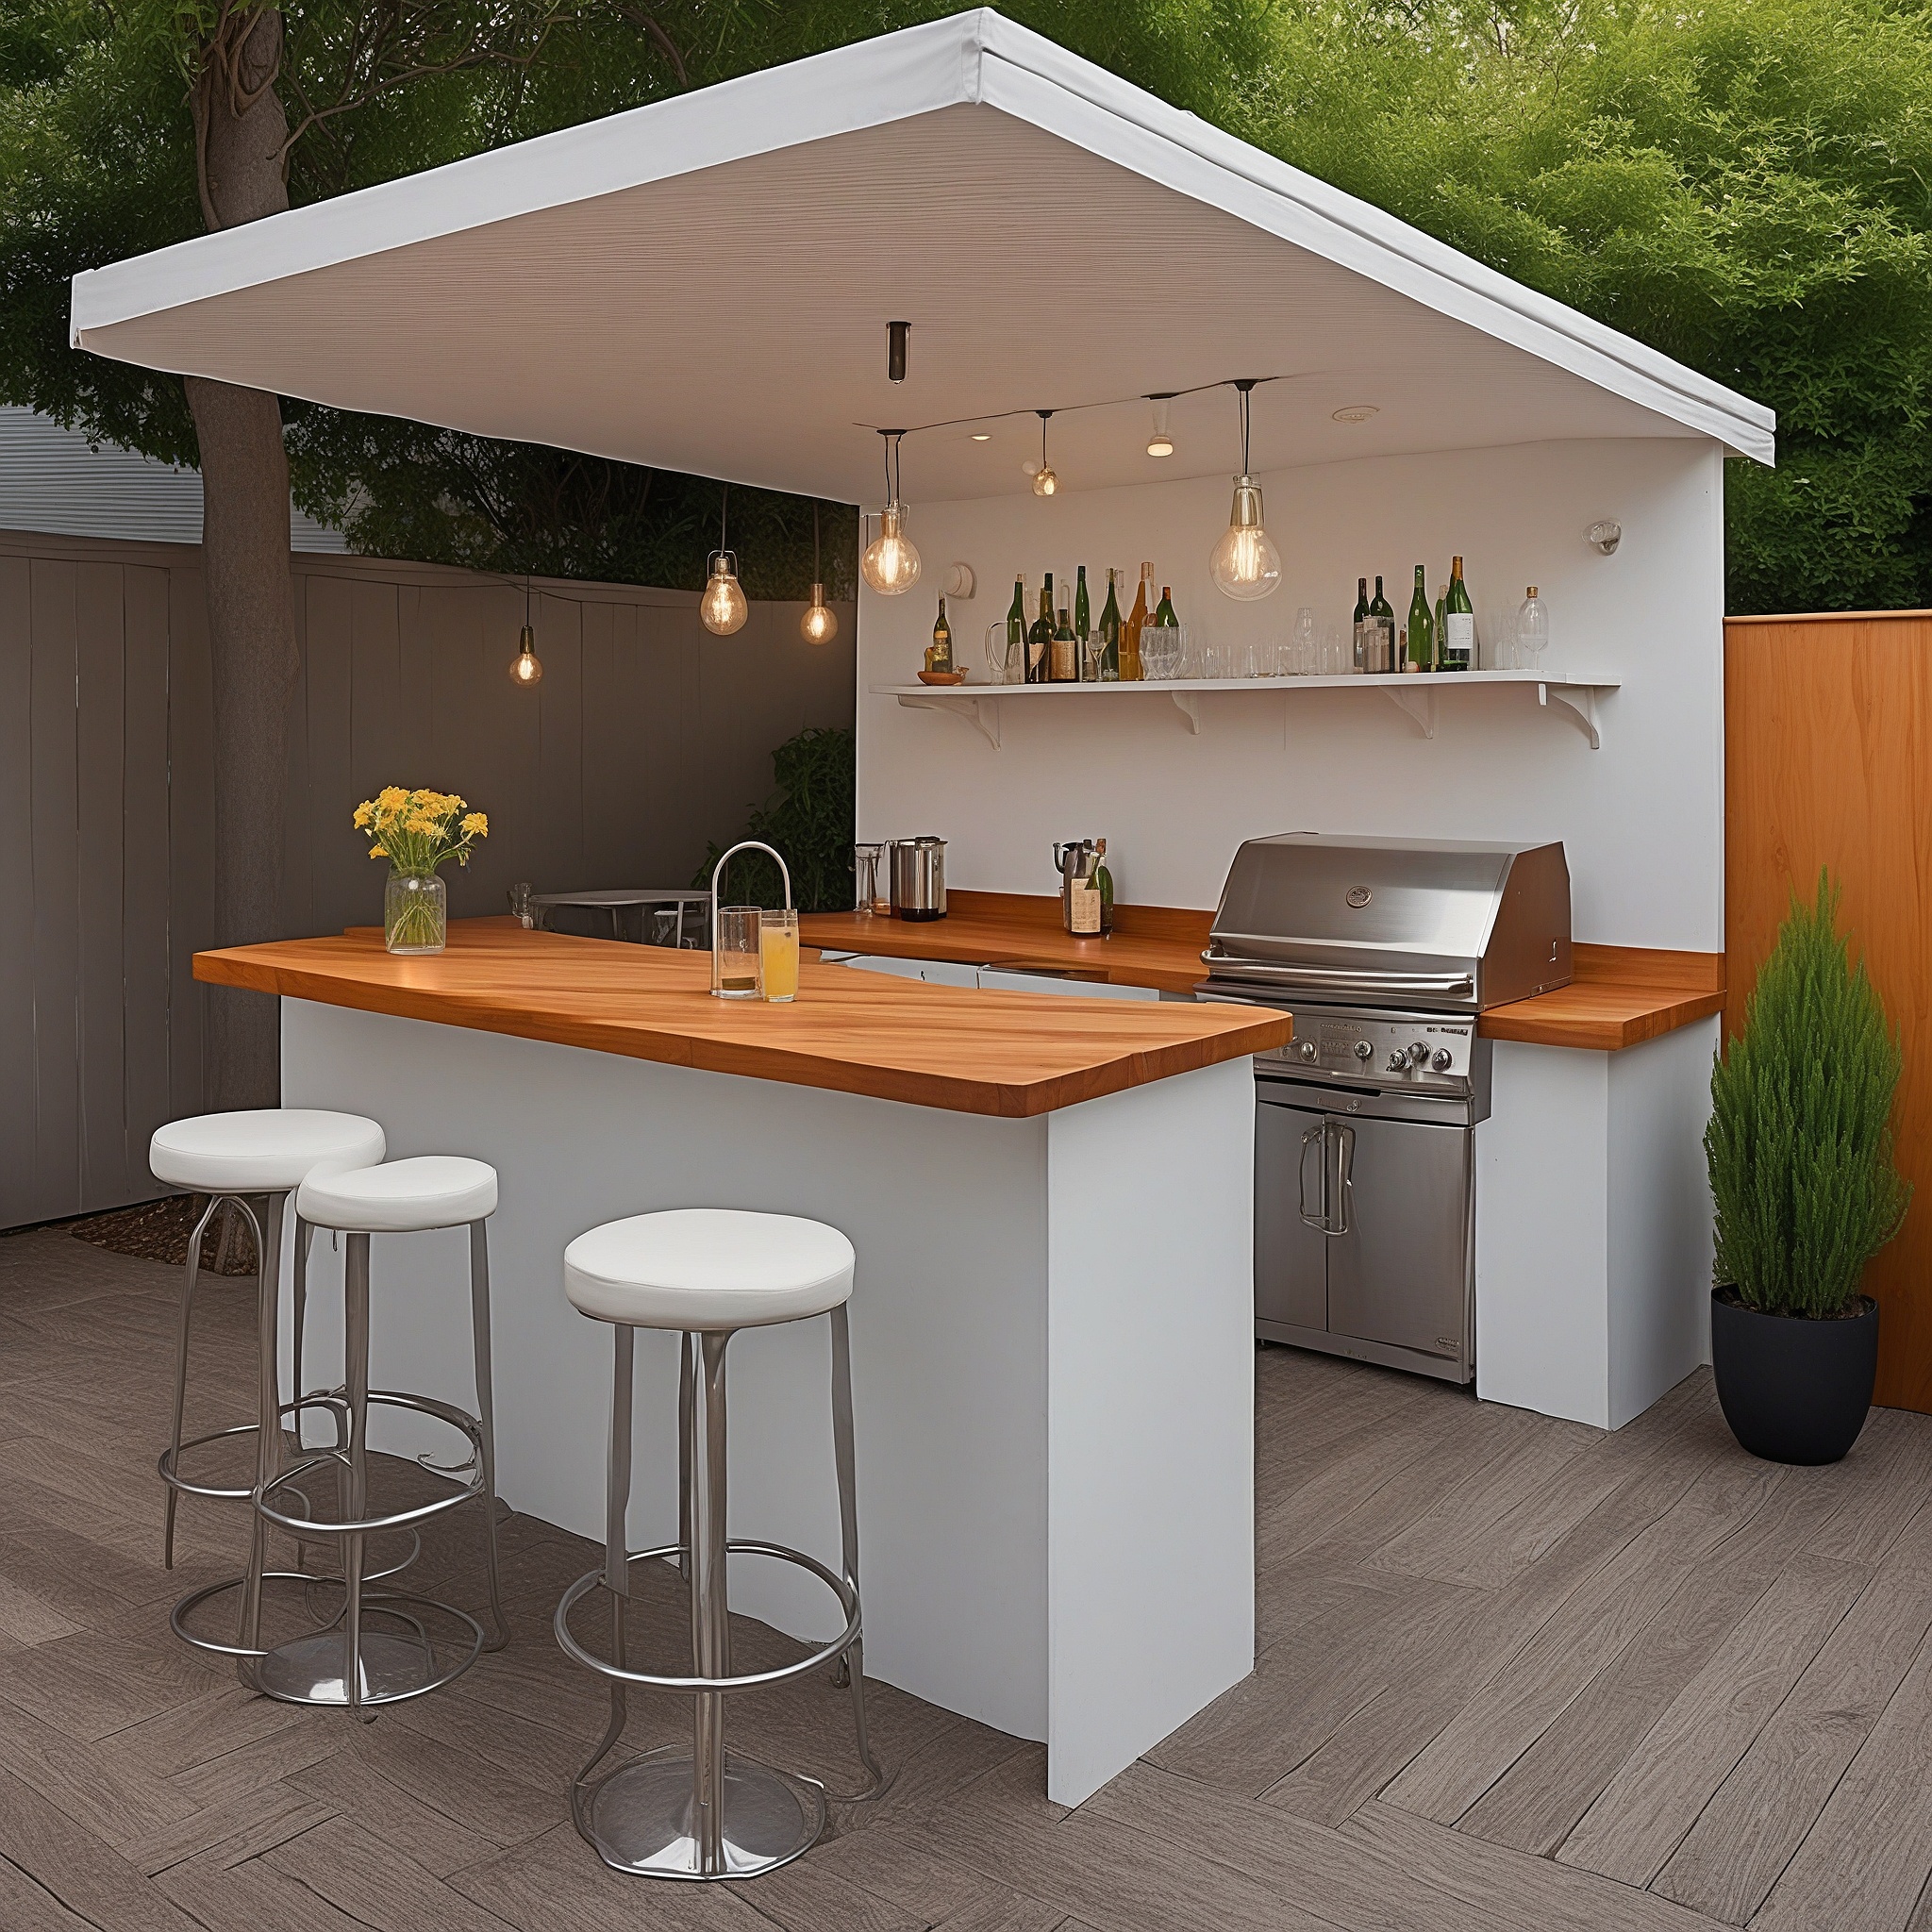 Casual PVC White Bar And Grill With Wood Countertops